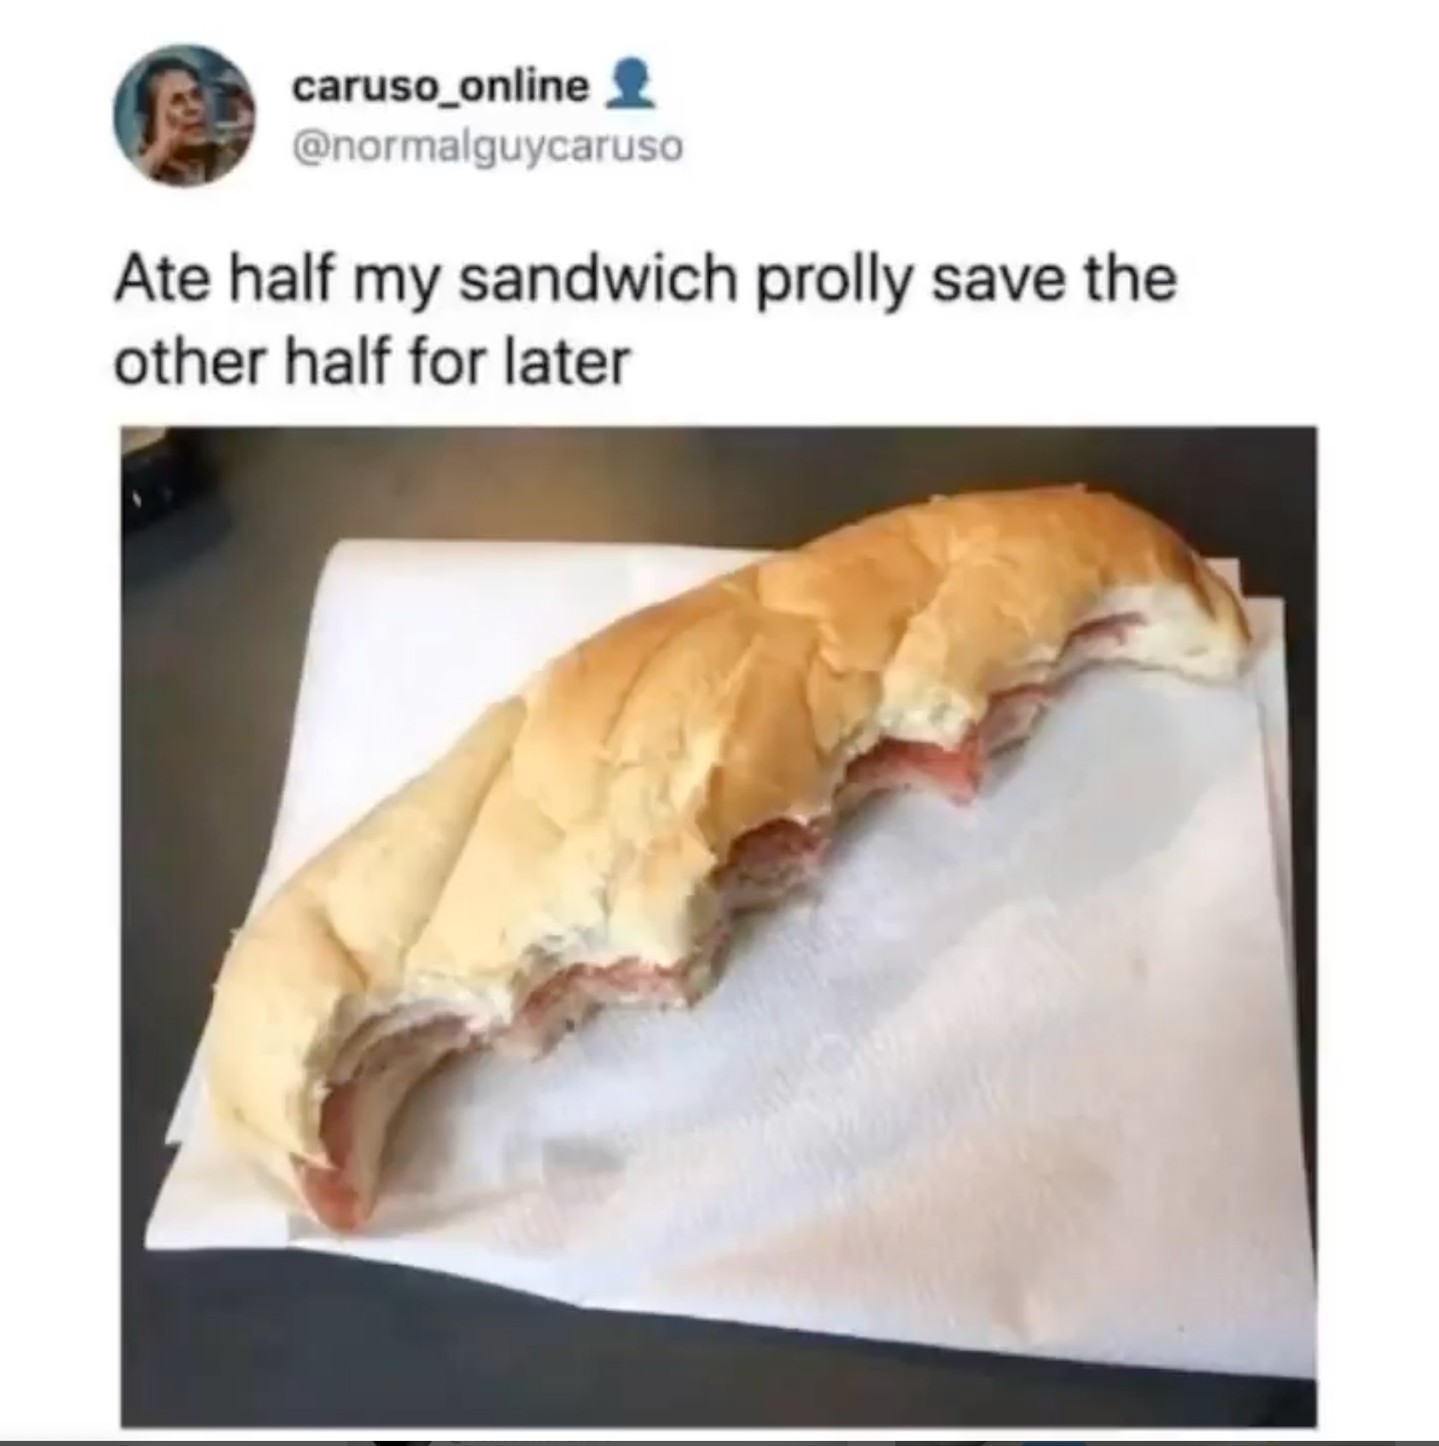 dank memes - funny memes - ate half my sandwich meme - caruso_online Ate half my sandwich prolly save the other half for later